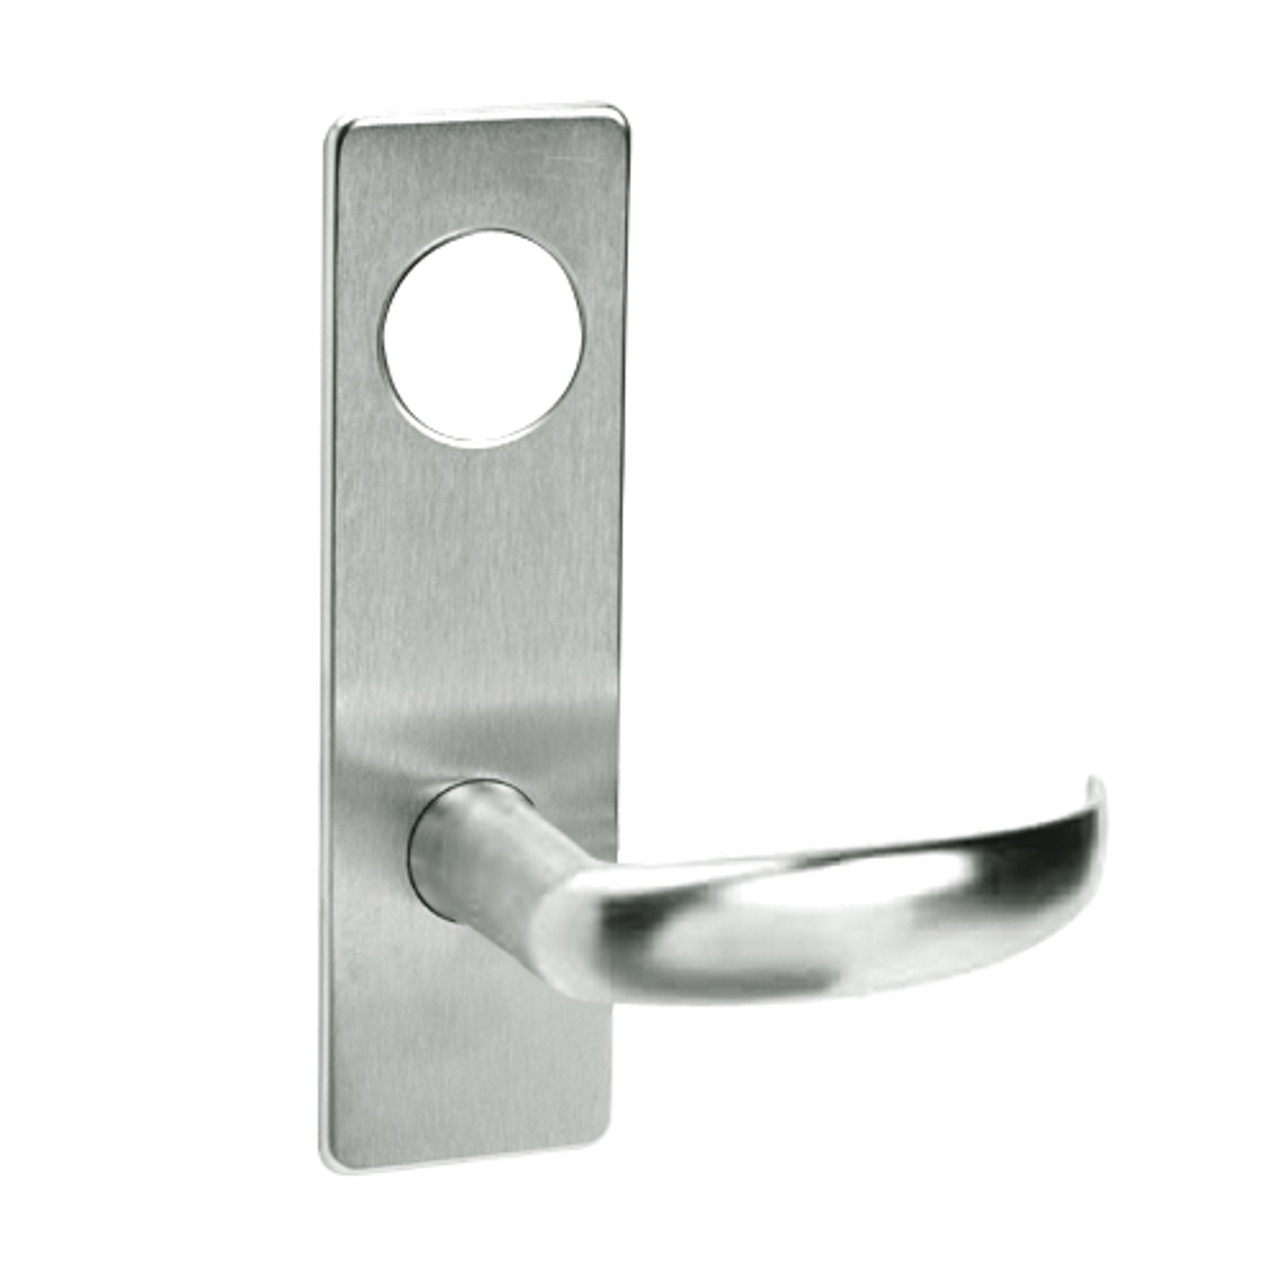 ML2067-PSR-618-LC Corbin Russwin ML2000 Series Mortise Apartment Locksets with Princeton Lever in Bright Nickel